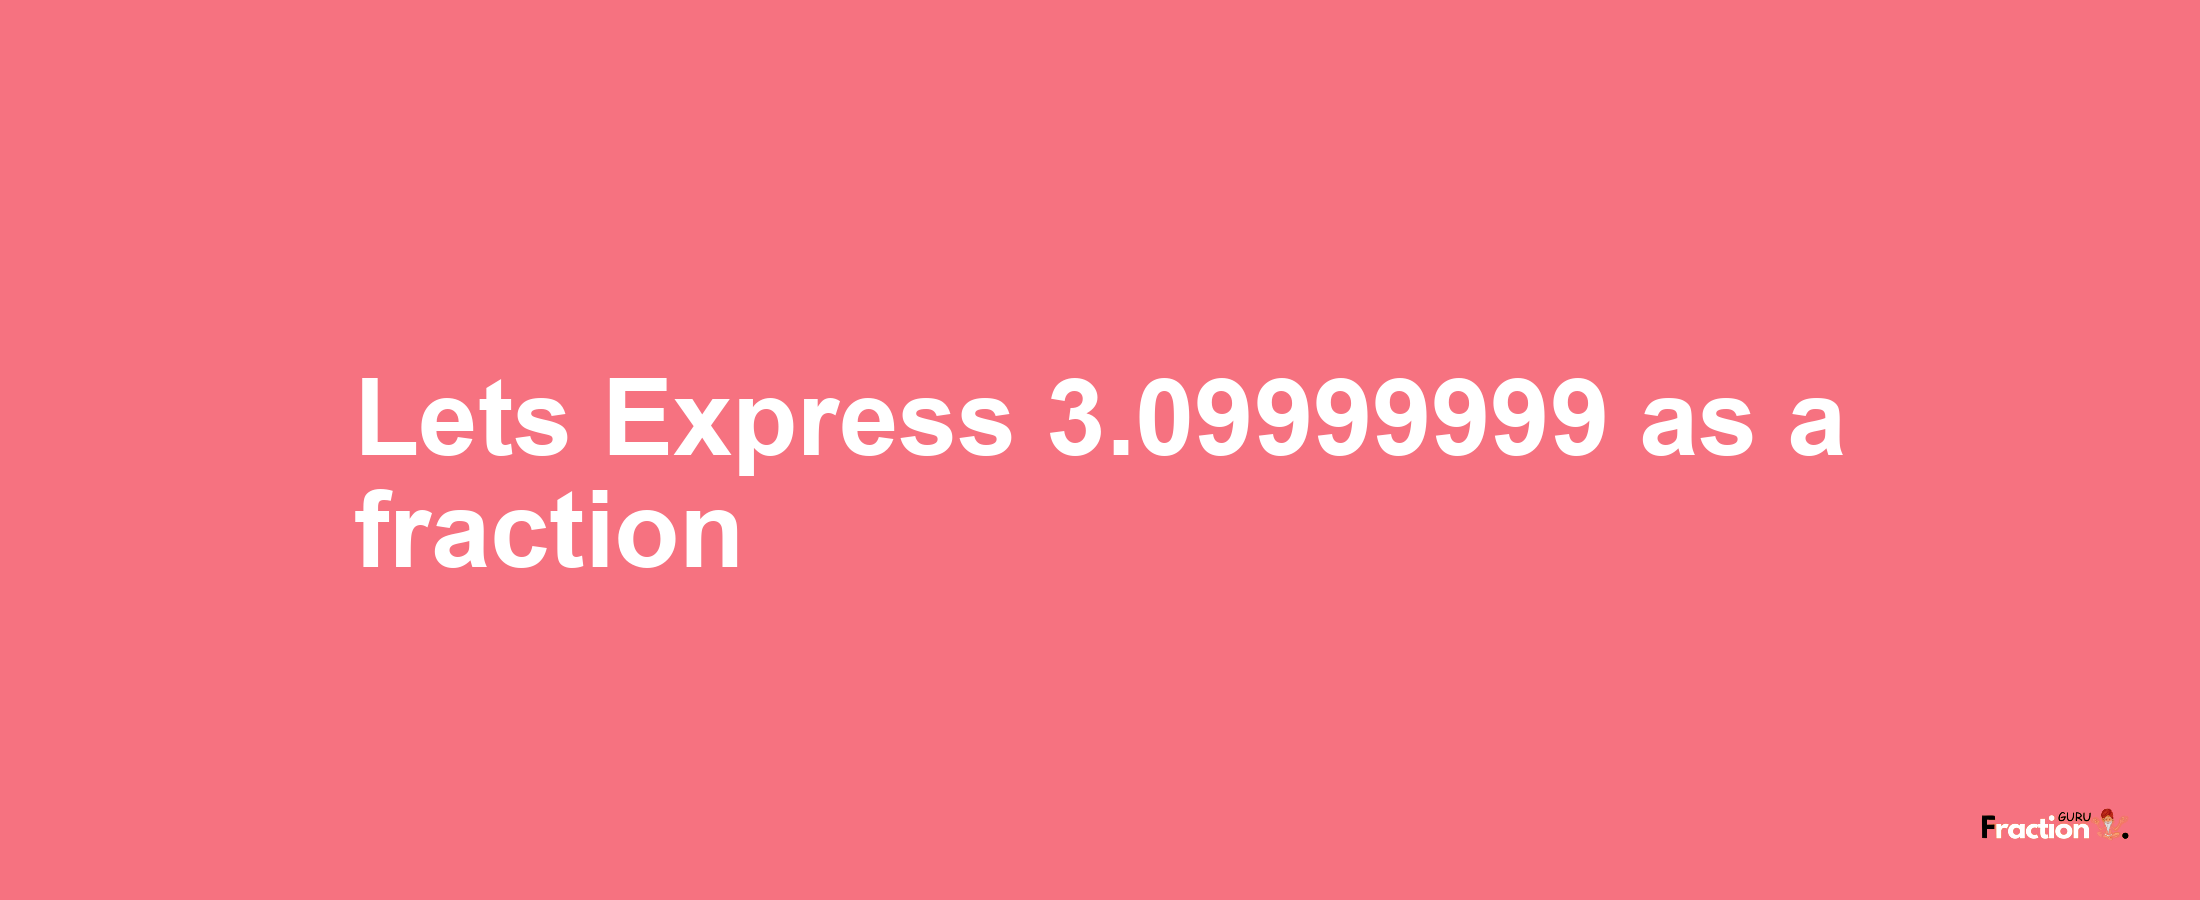 Lets Express 3.09999999 as afraction